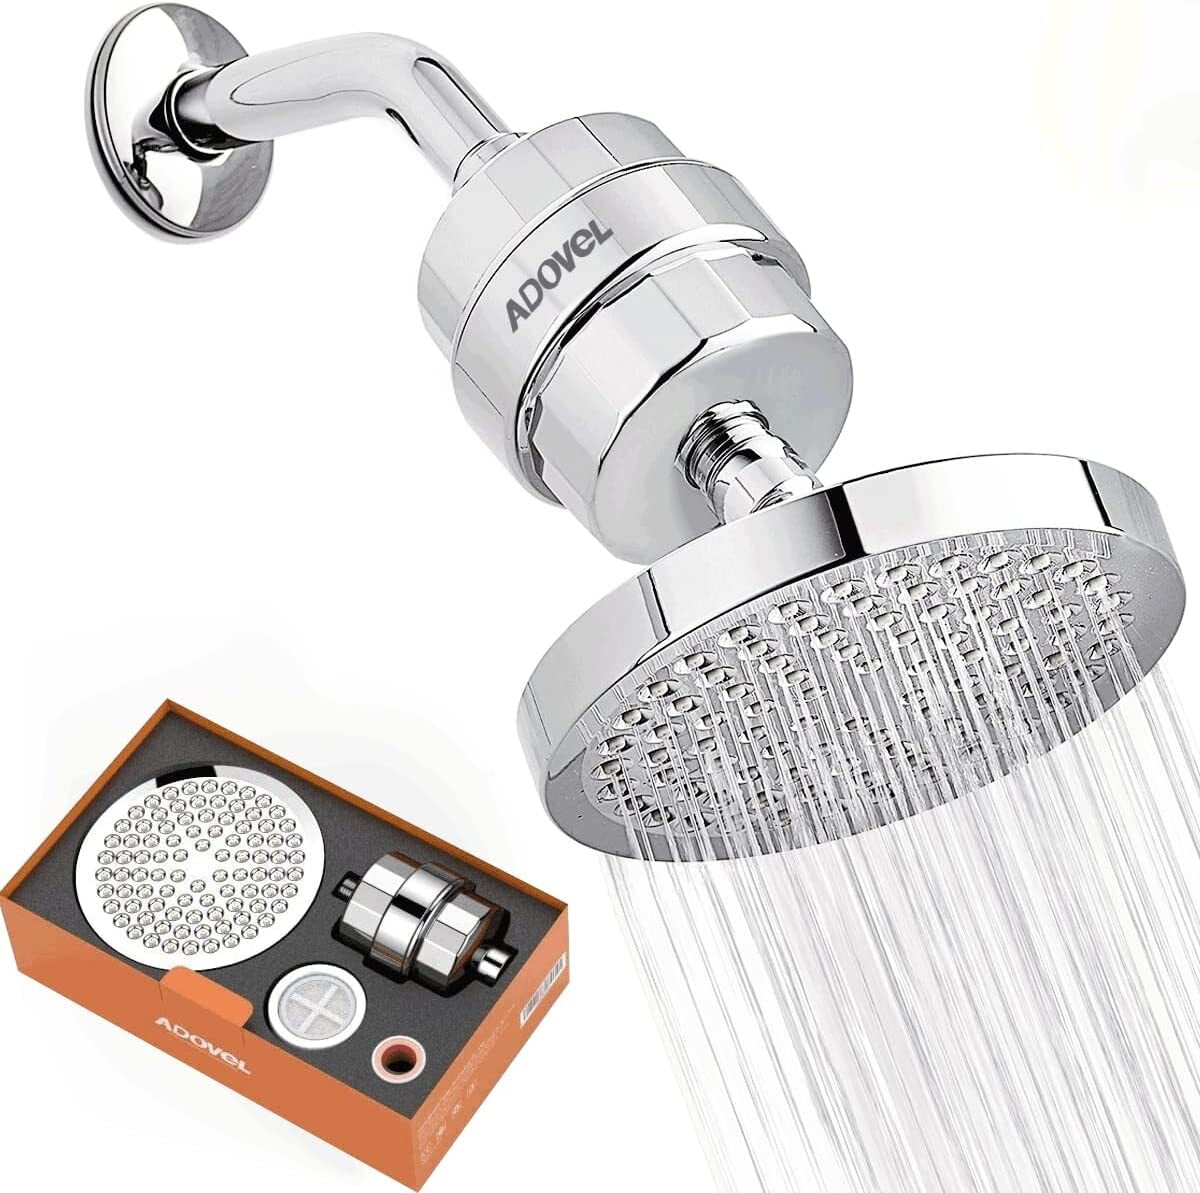 ADOVEL High Output Shower Head and Hard Water Filter for Bathroom